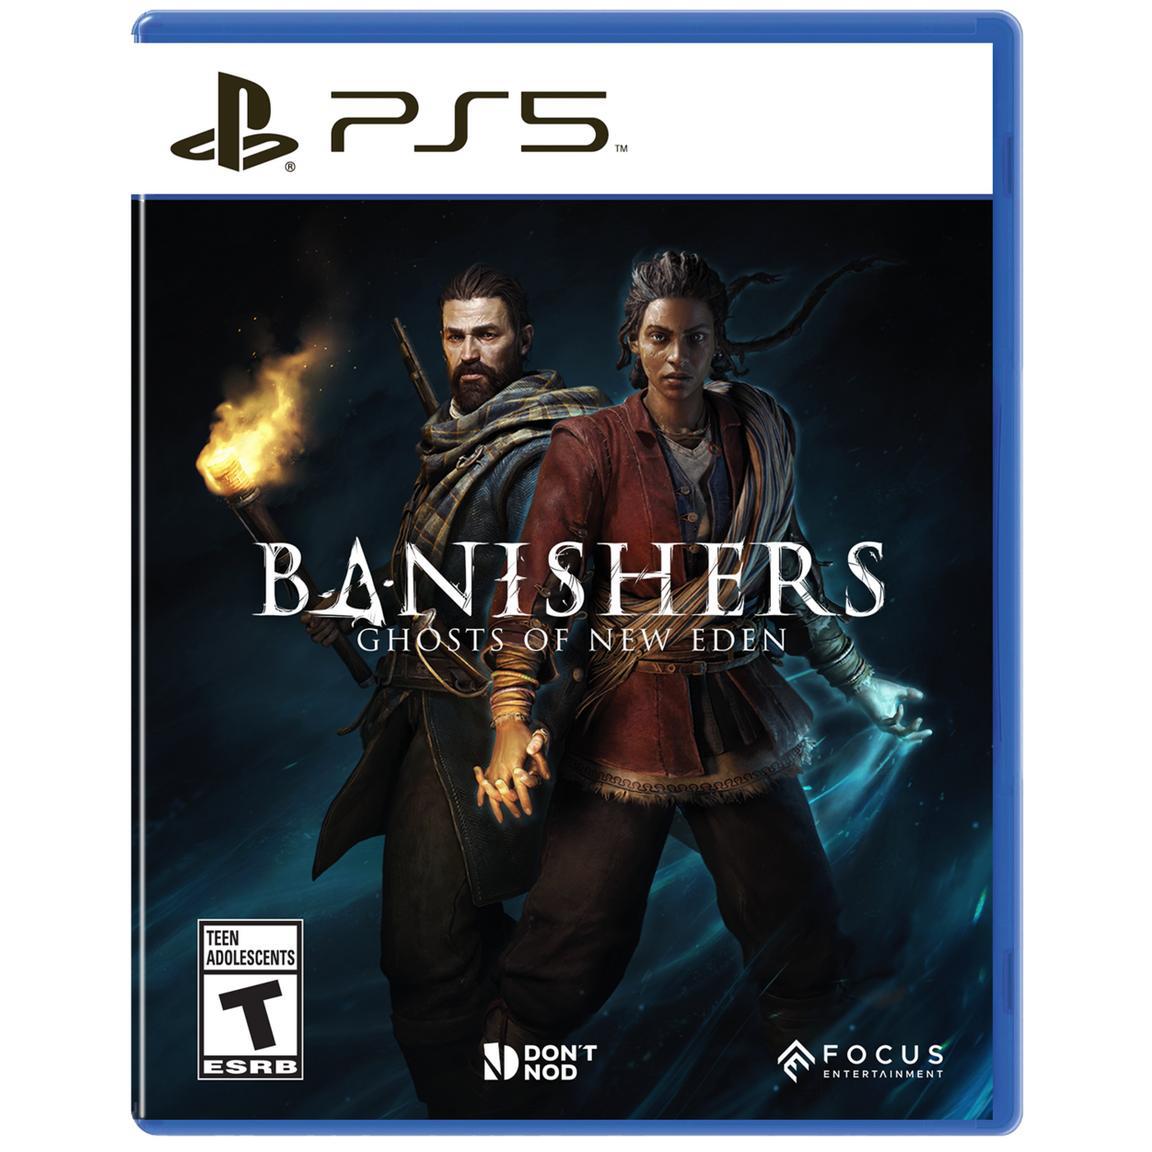 PS5 Banishers Ghosts Of New Eden